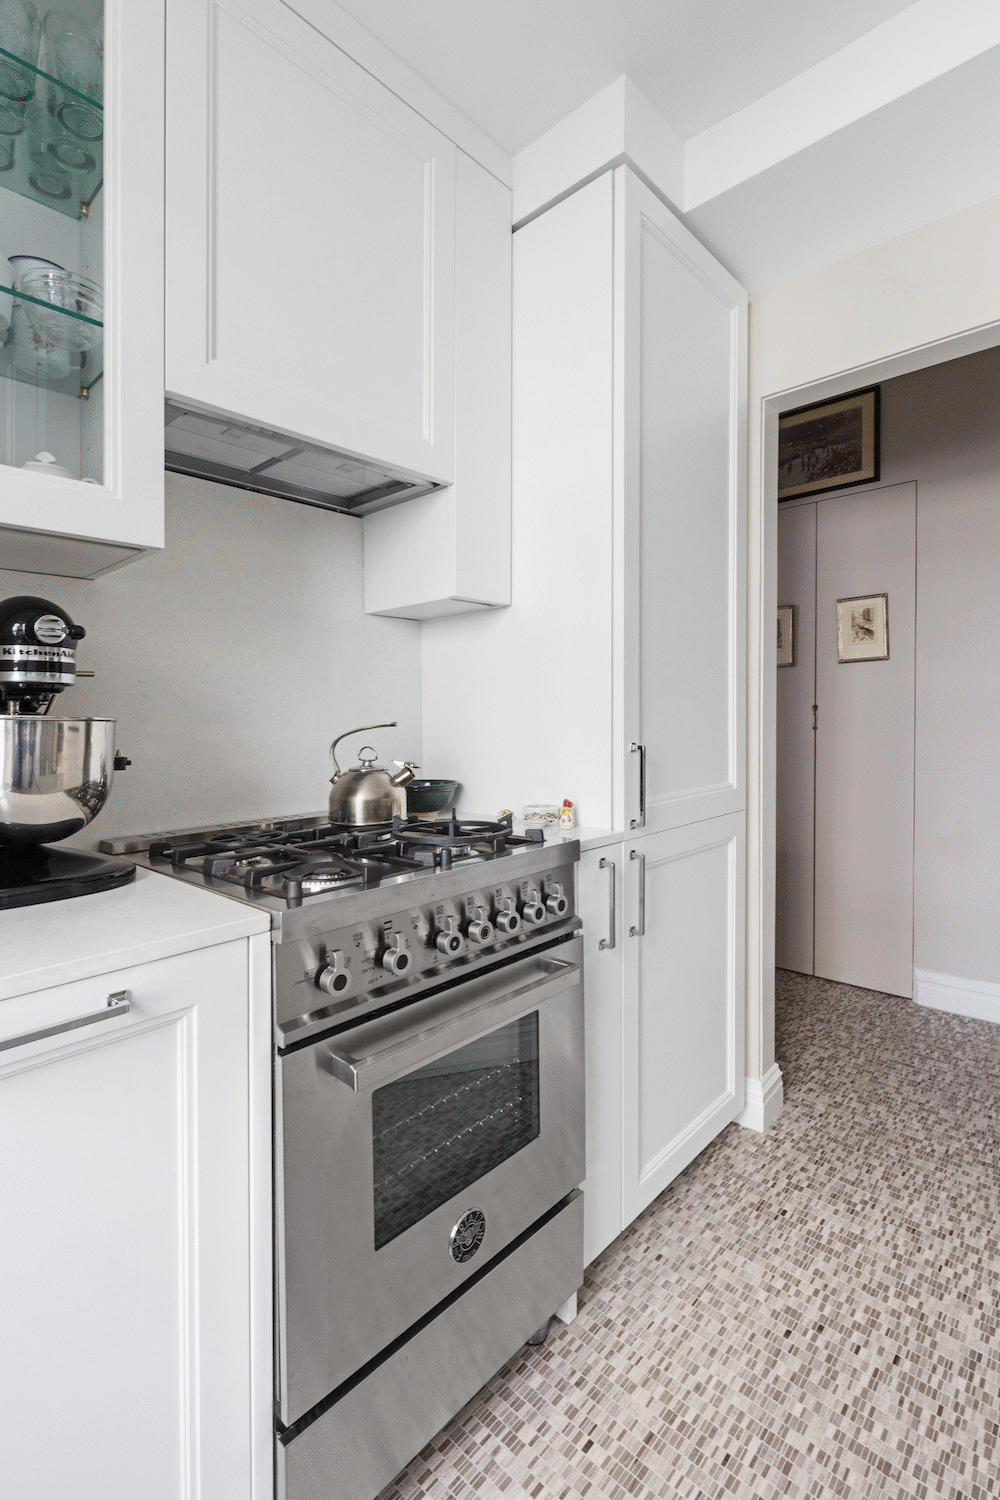 patterned floor in a small kitchen with white kitchen cabinets and cooking range after renovation